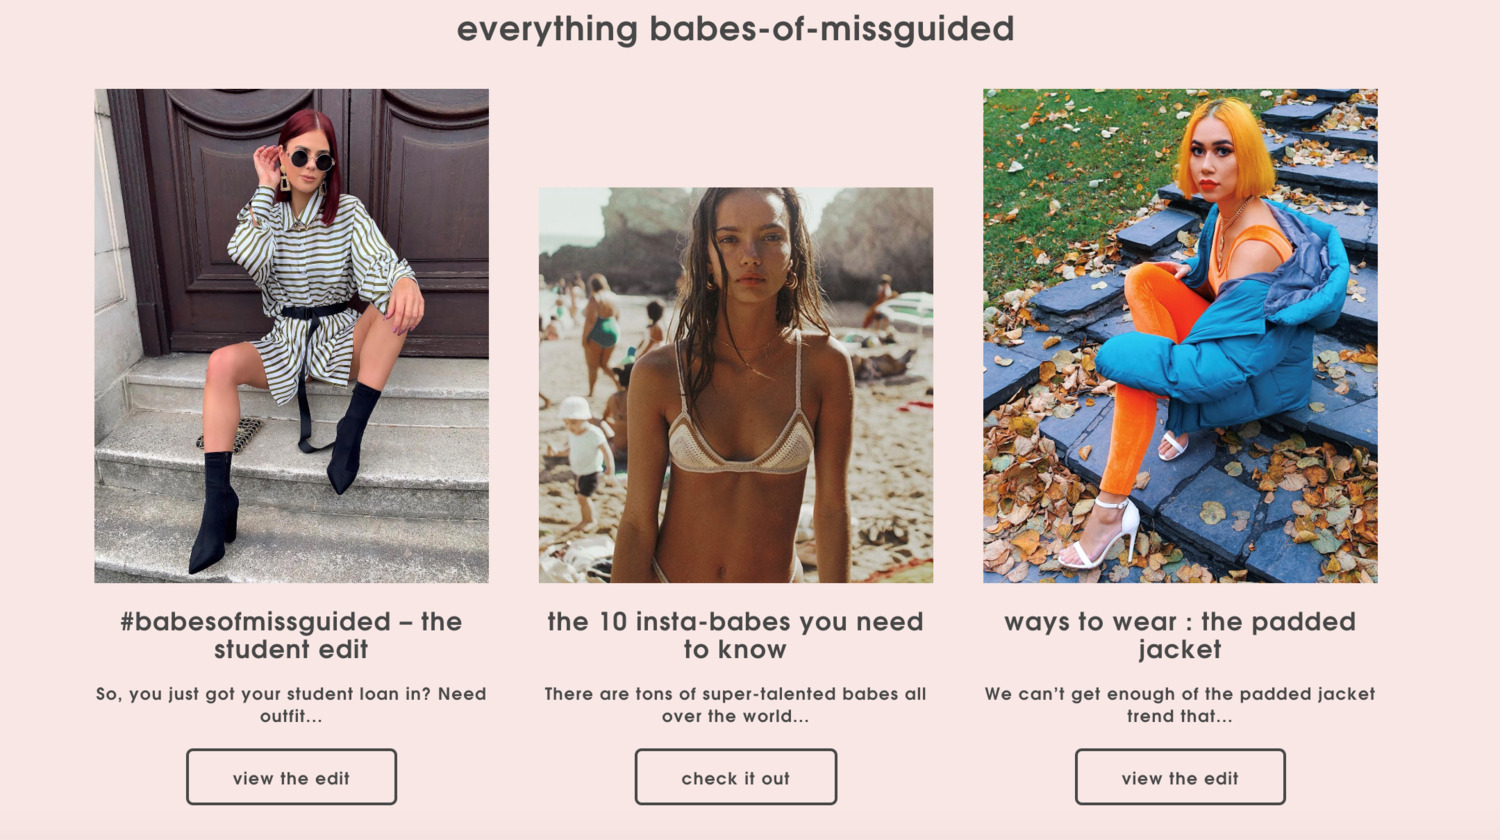 Going Viral With #BabesOfMissguided